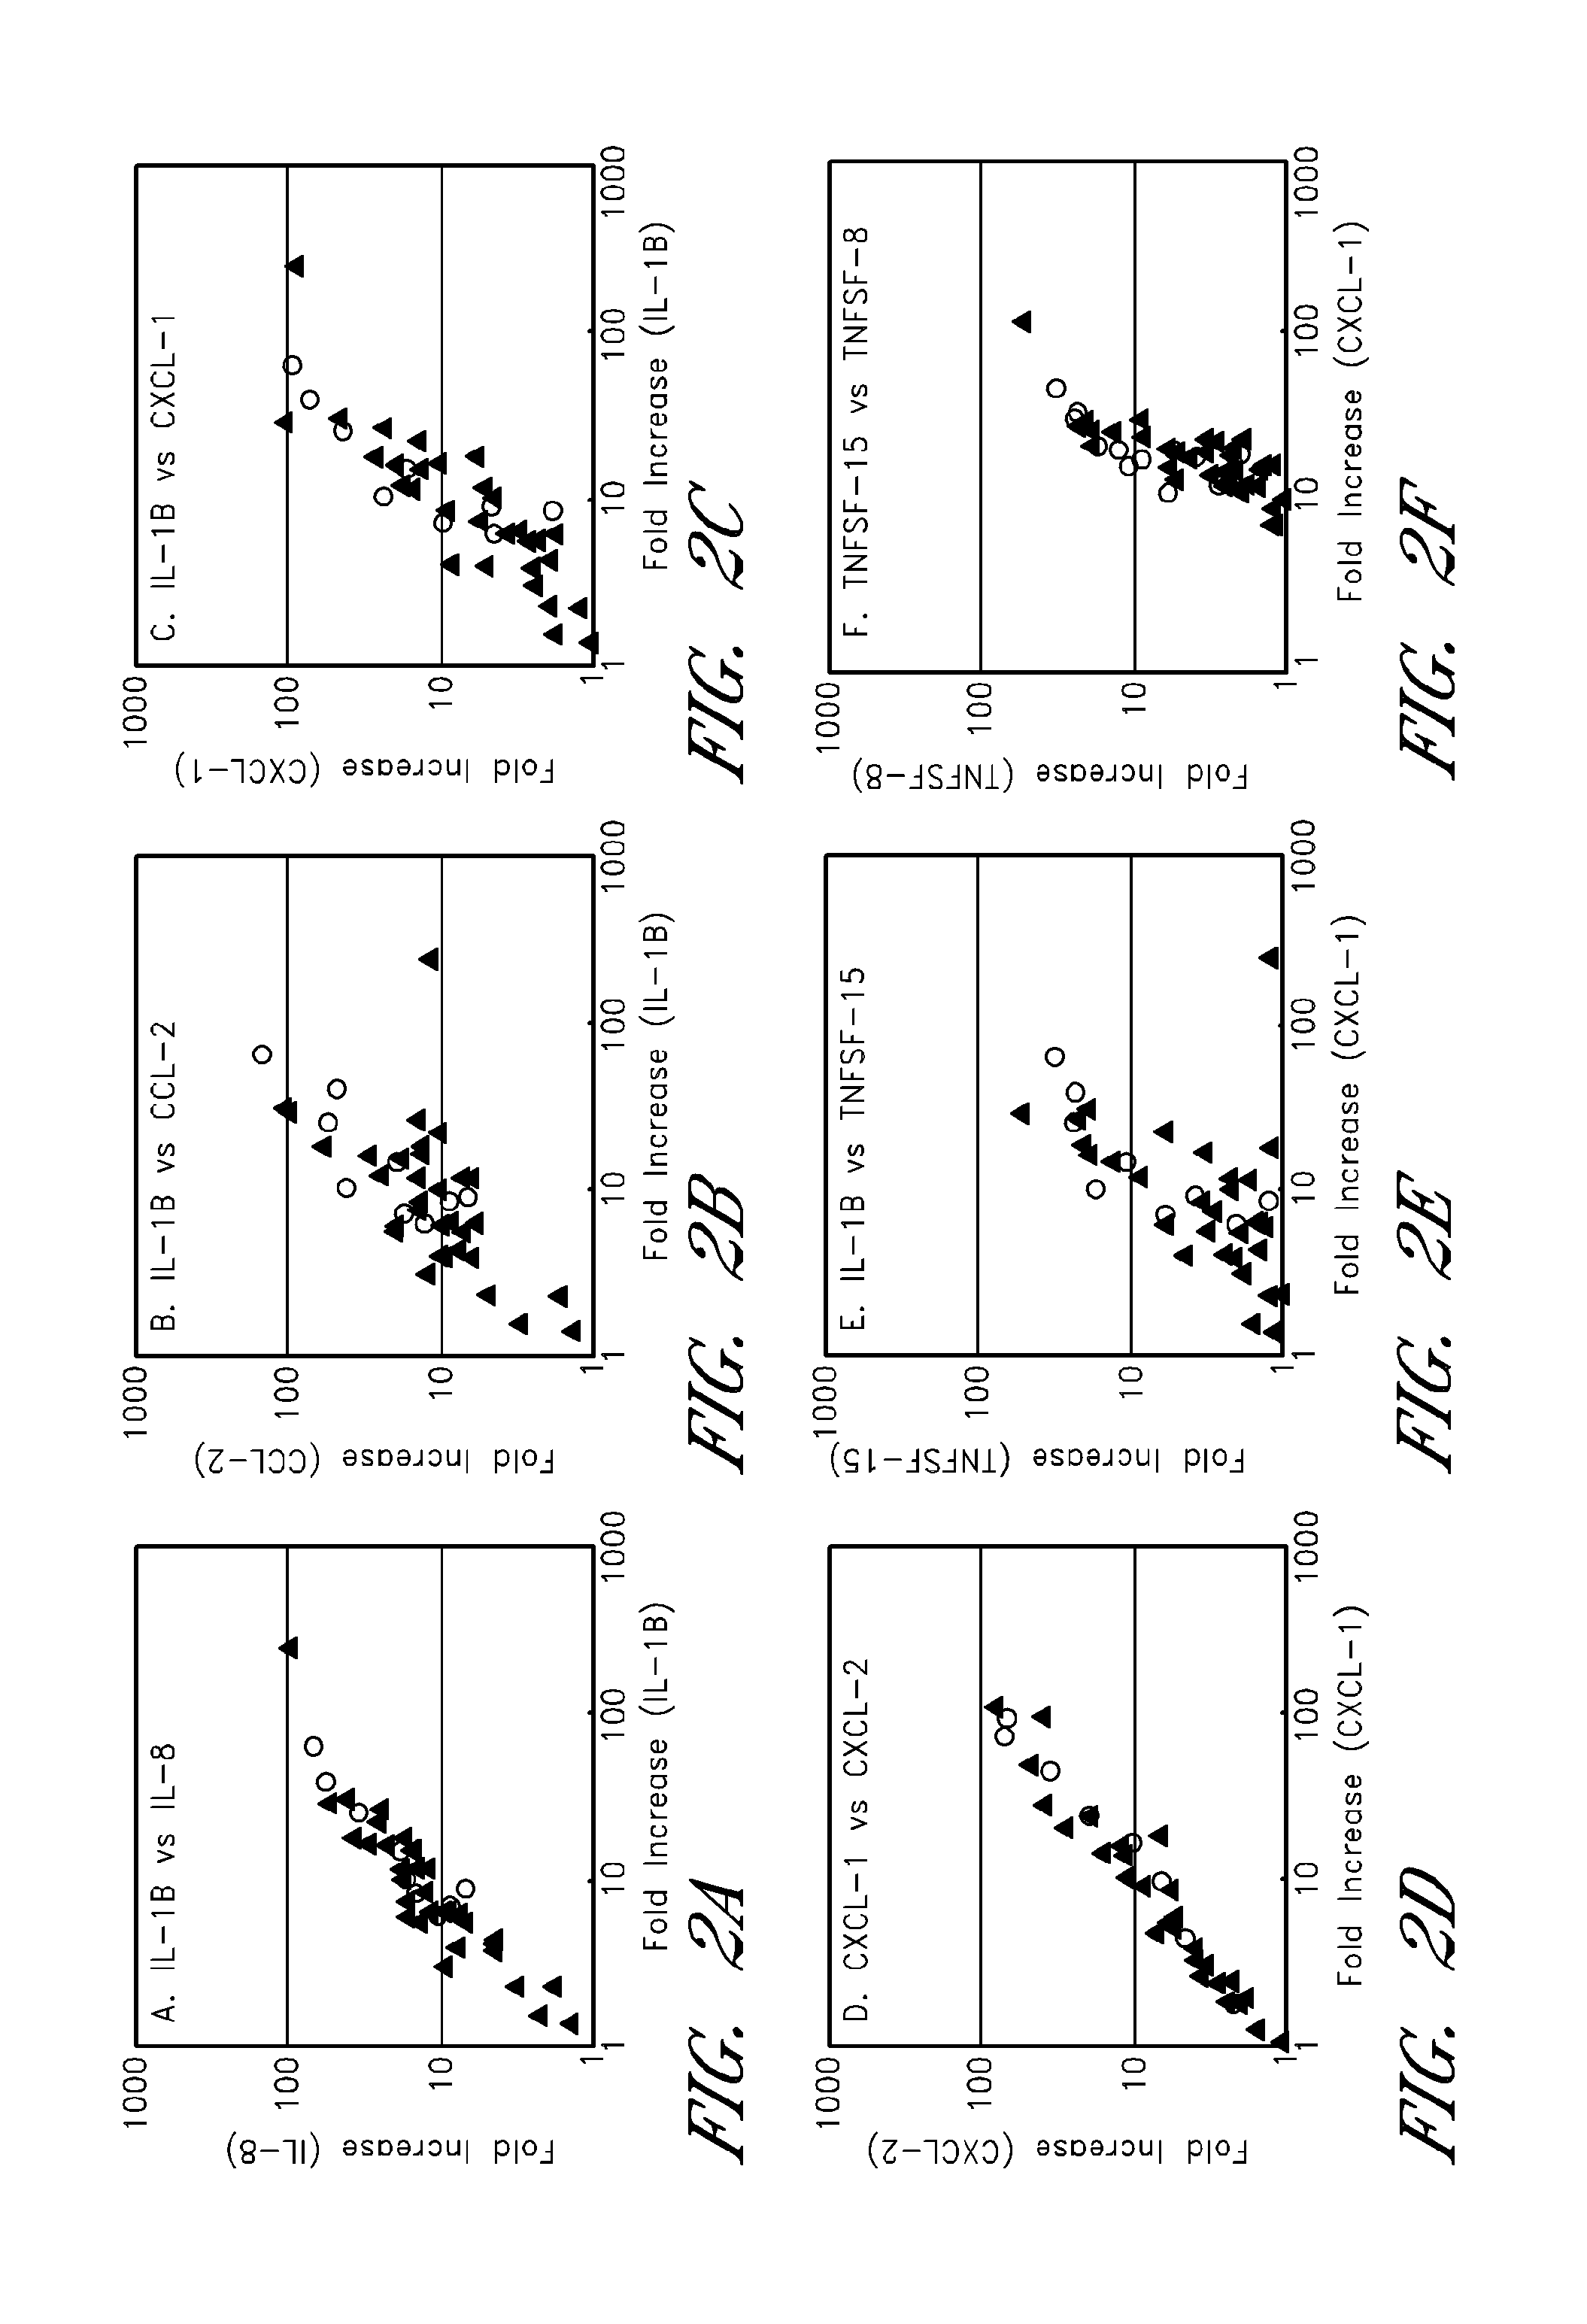 Methods regarding enhanced T-cell receptor-mediated tumor necrosis factor superfamily mRNA expression in peripheral blood leukocytes in patients with crohn's disease